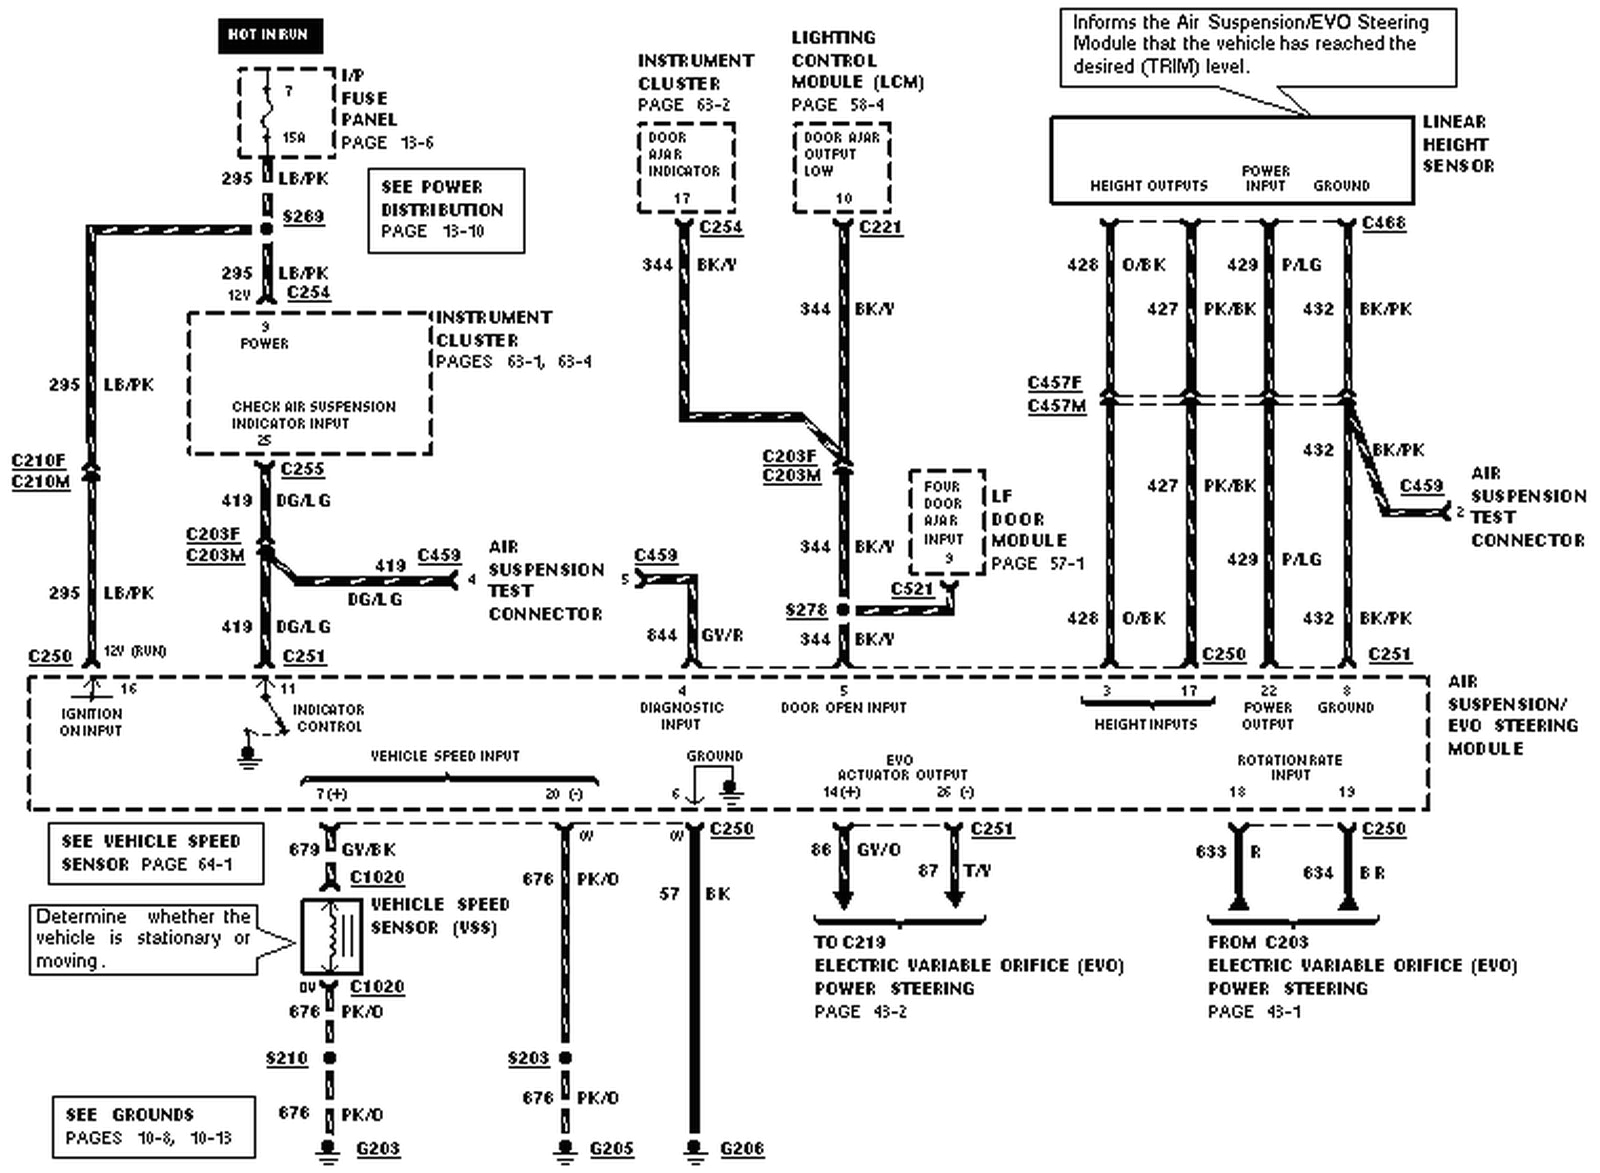 wiring diagram for 2003 lincoln town car get free image about wiring wiring diagram for 2003